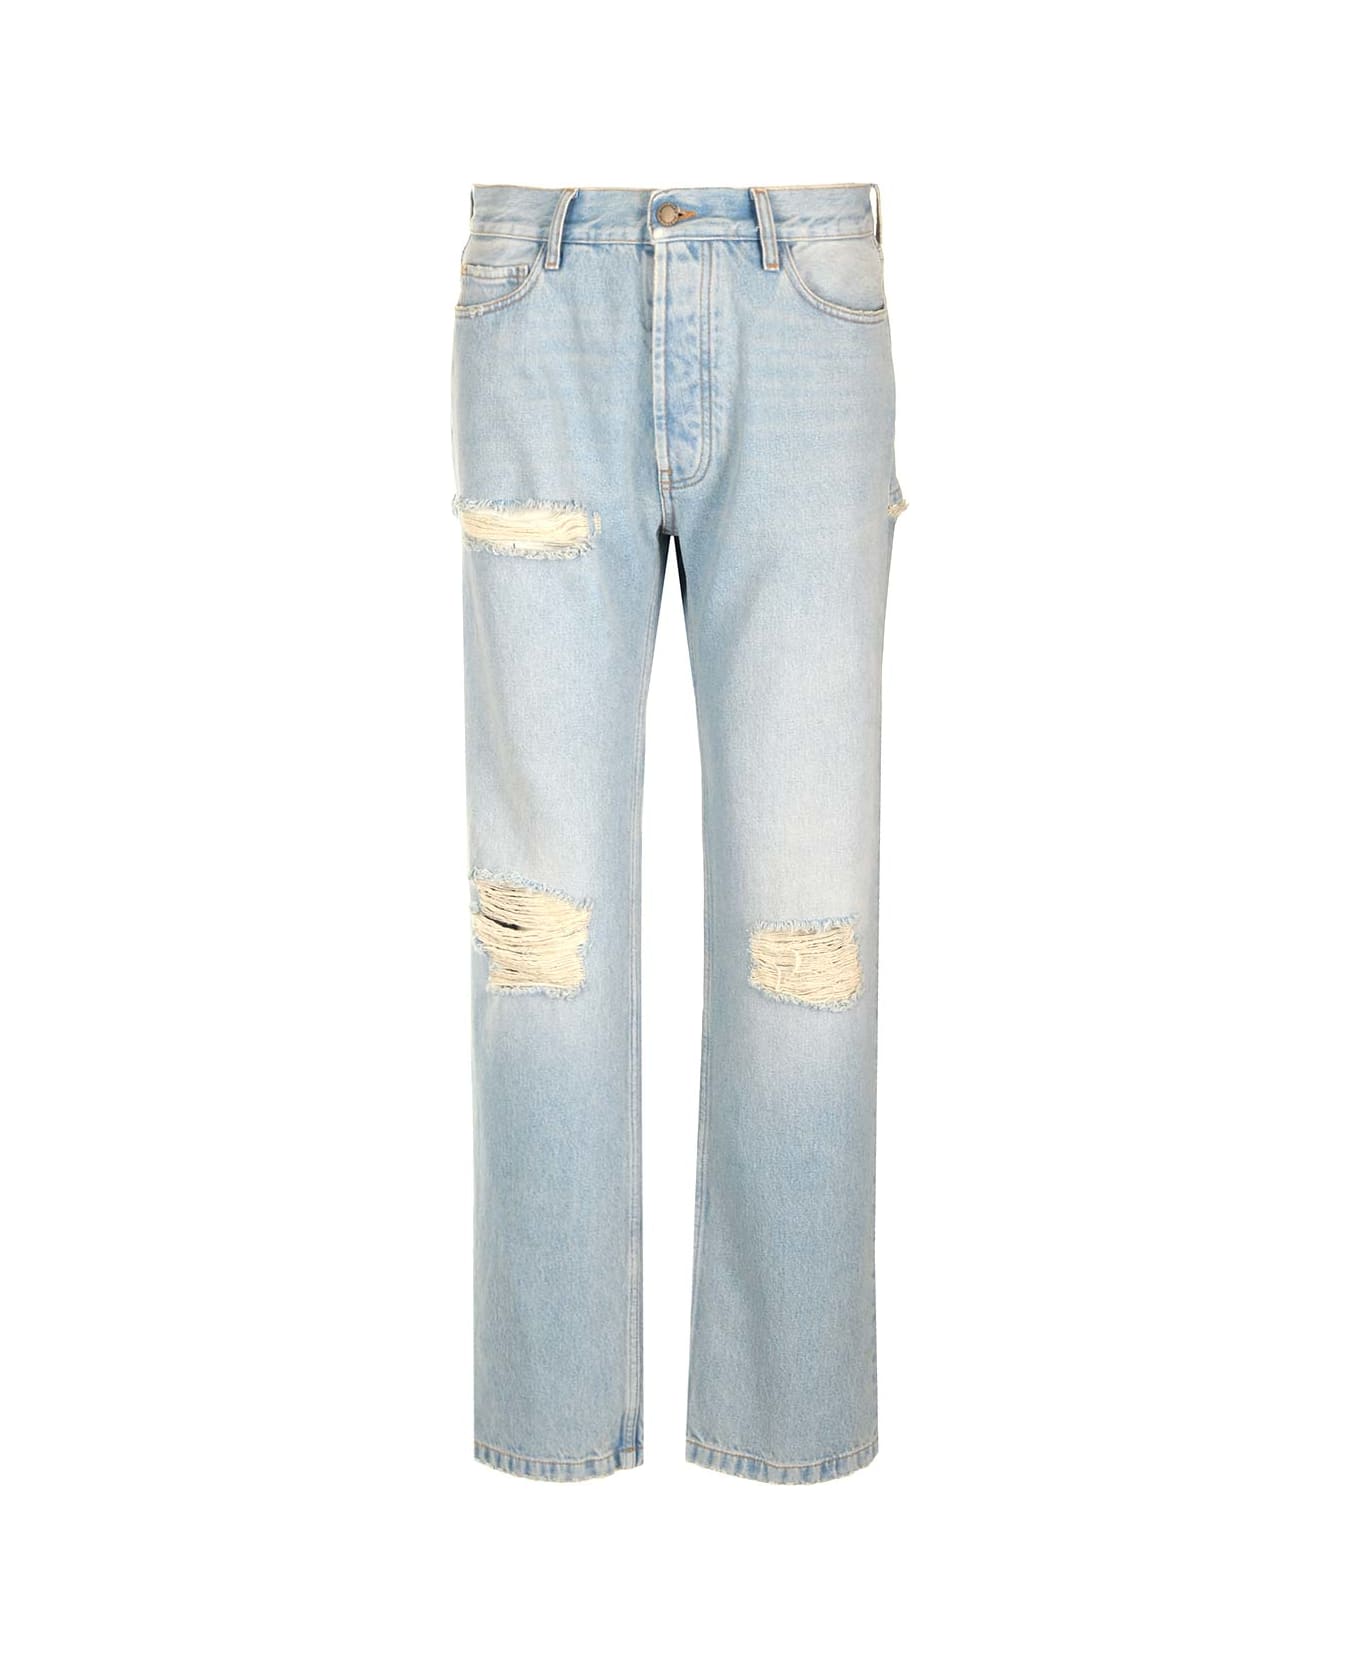 DARKPARK 'naomi' Ripped Jeans - Clear Blue デニム